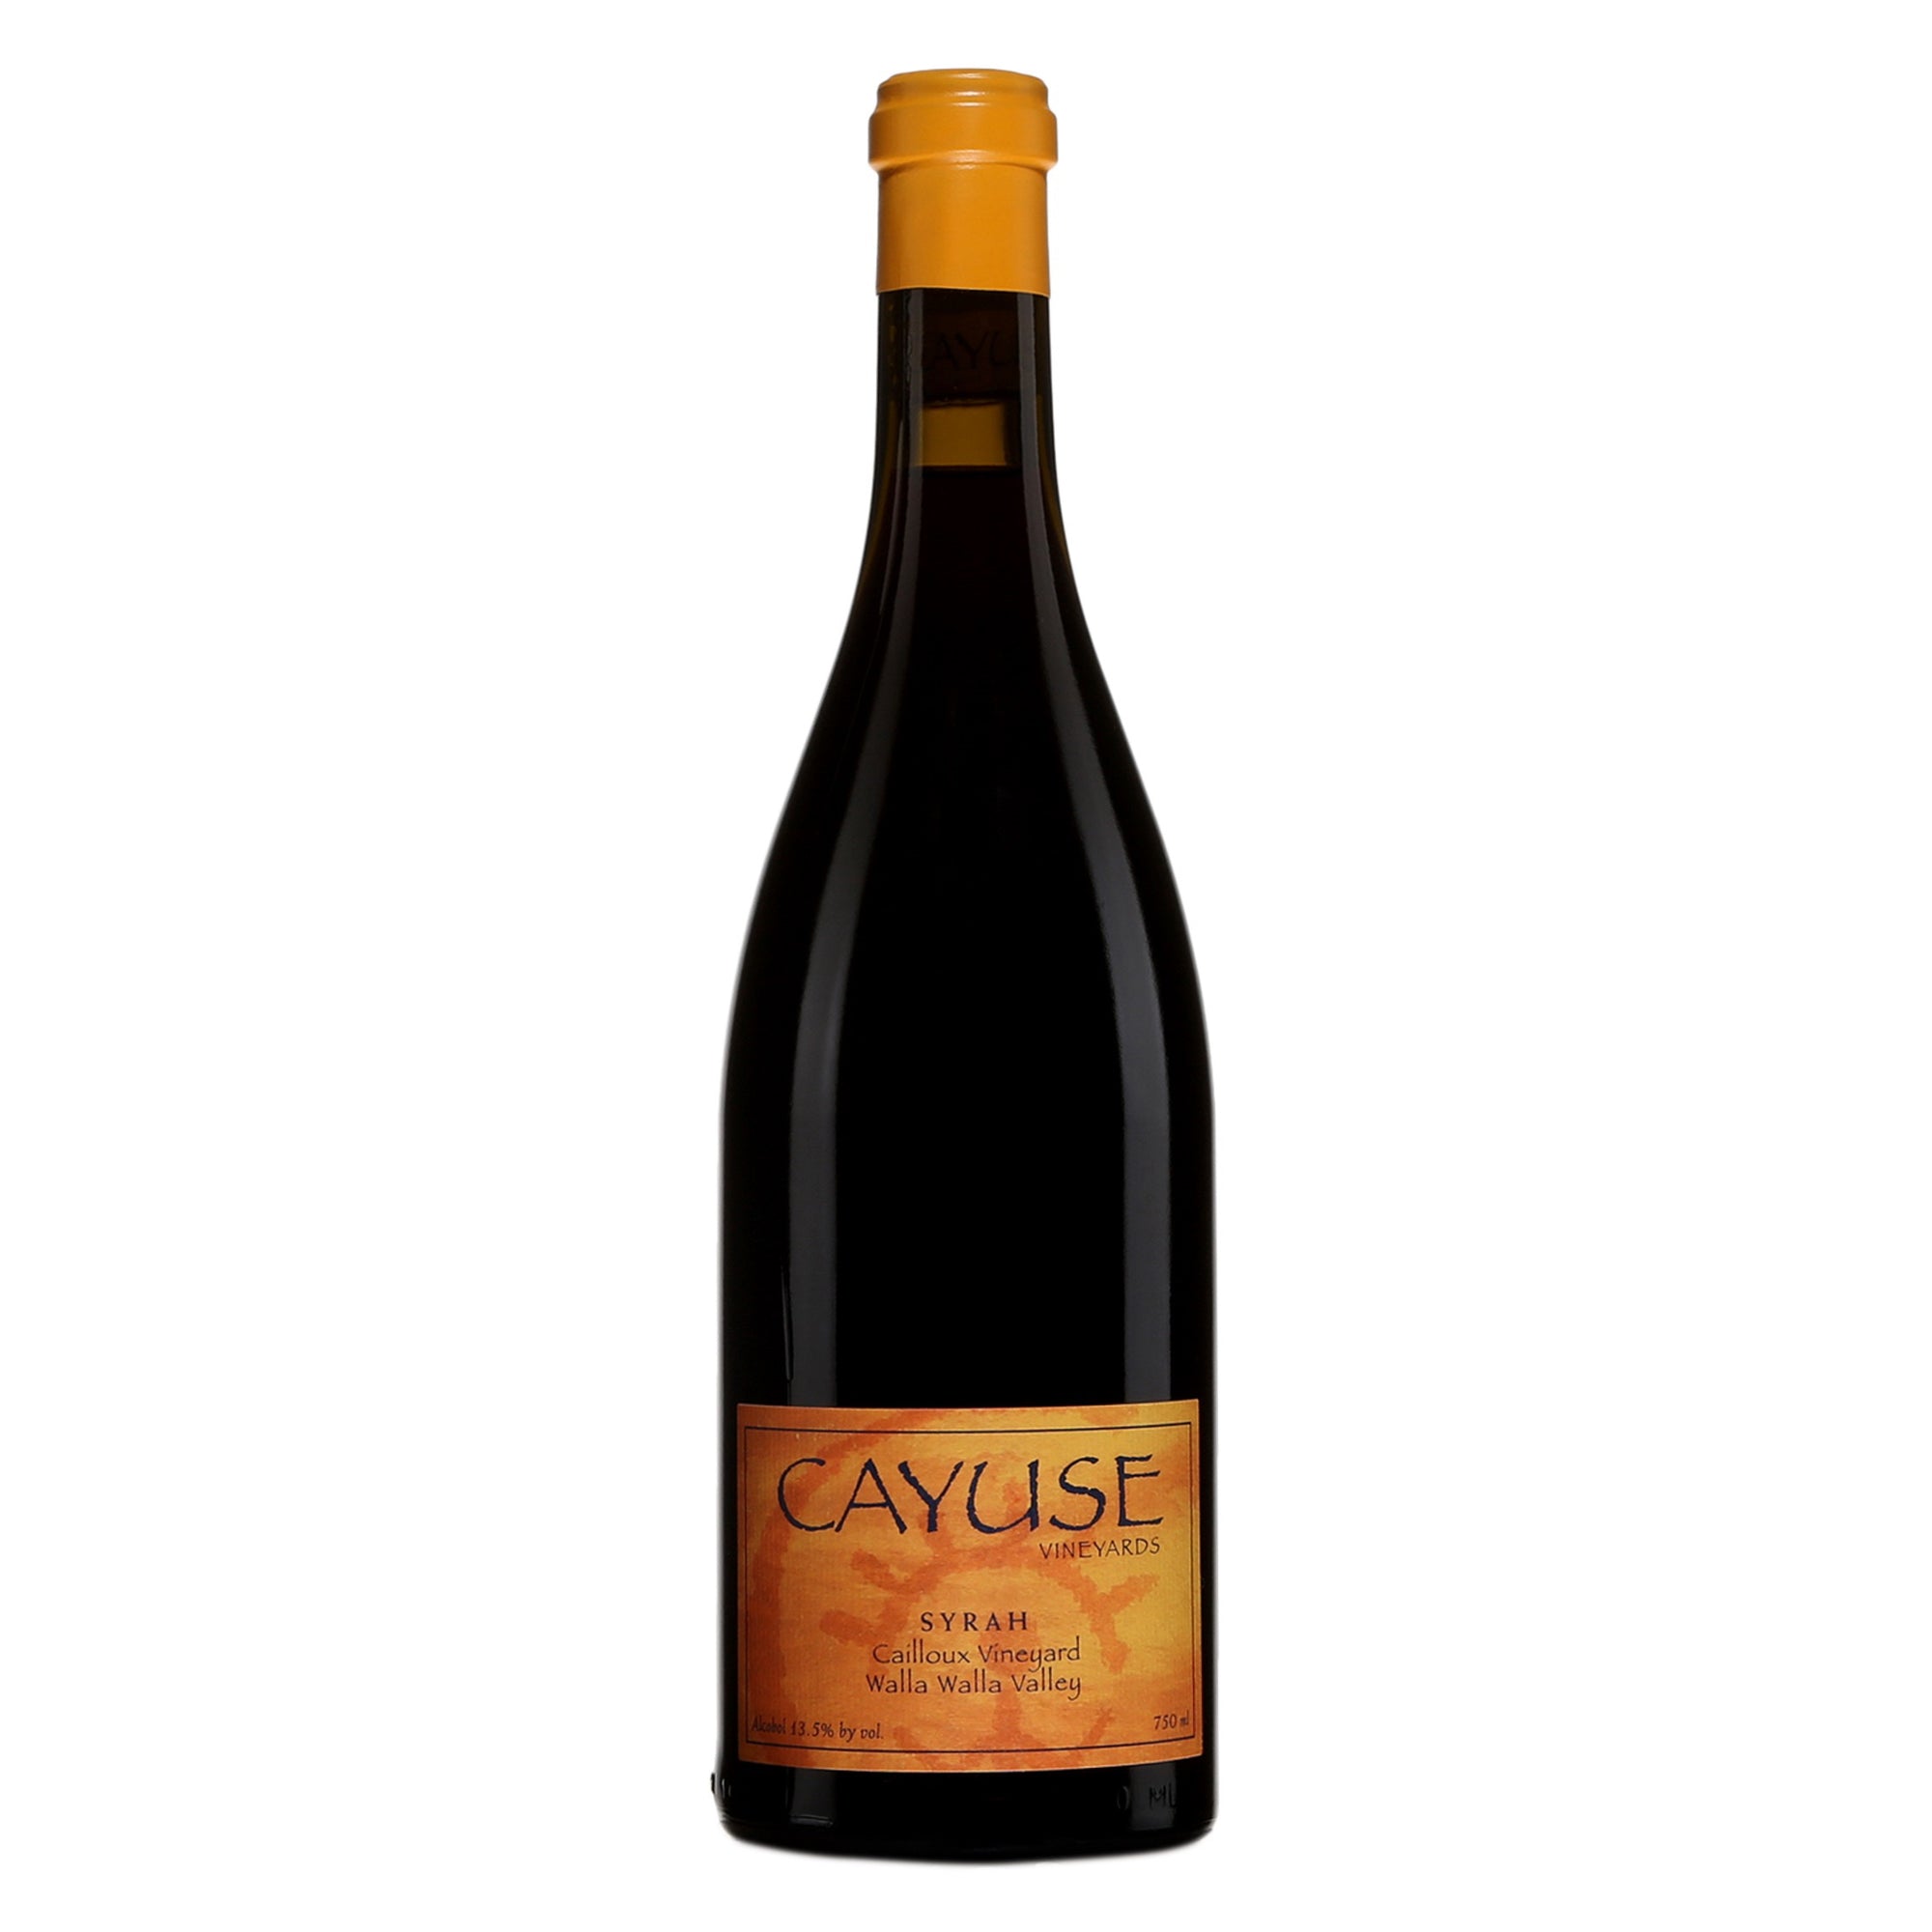 CAYUSE "Cailloux" 2017